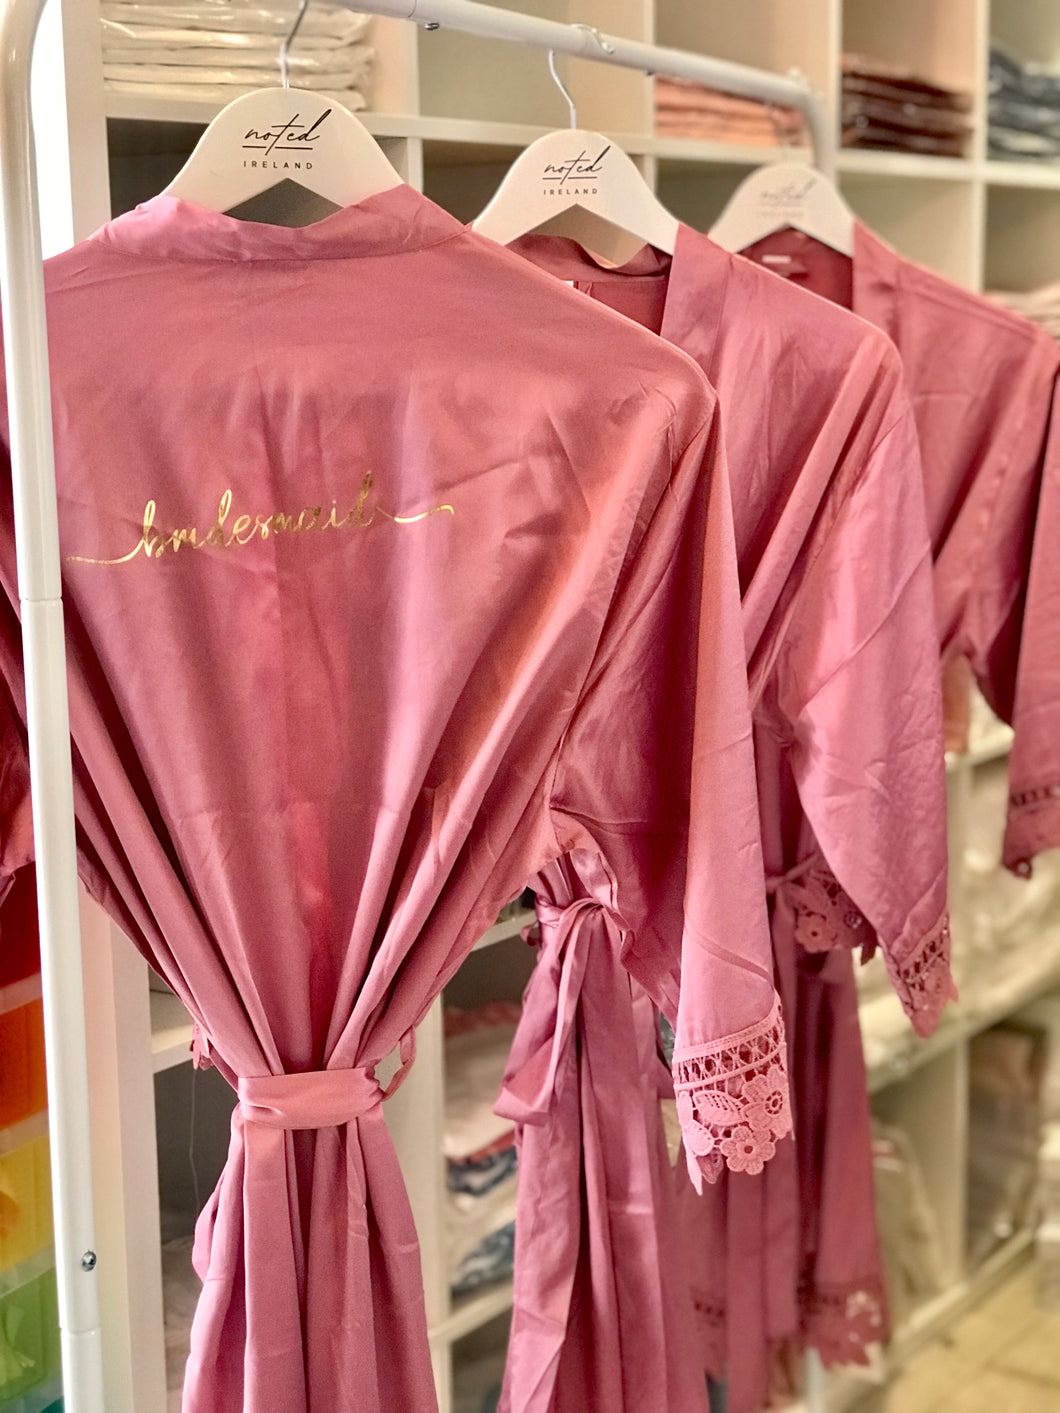 Rich Pink Lace Trim Robes with Gold BRIDESMAID text